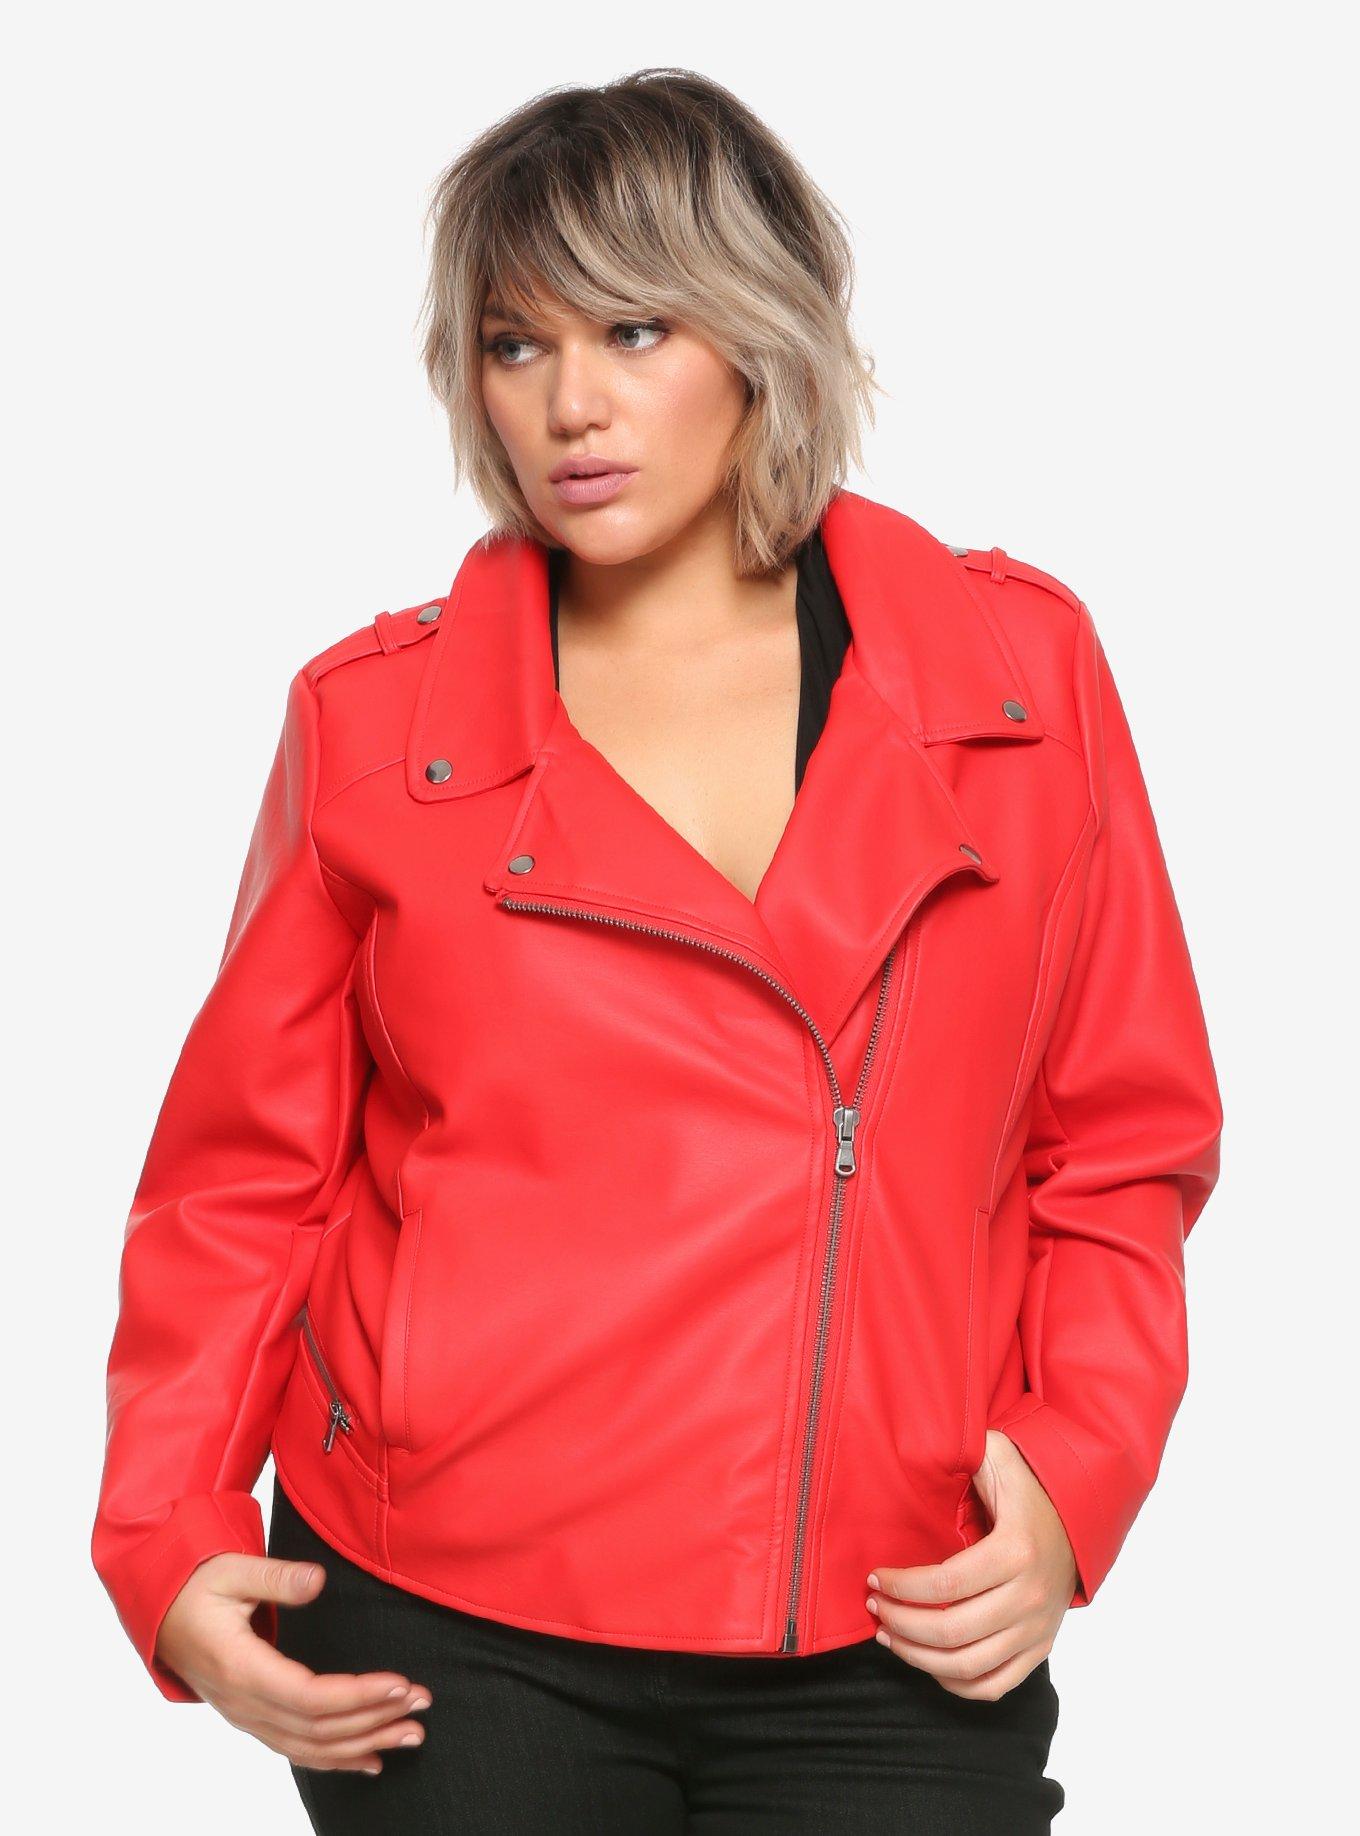 Riverdale Cheryl Southside Serpents Faux Leather Red Girls Jacket Plus Size Hot Topic Exclusive, , alternate